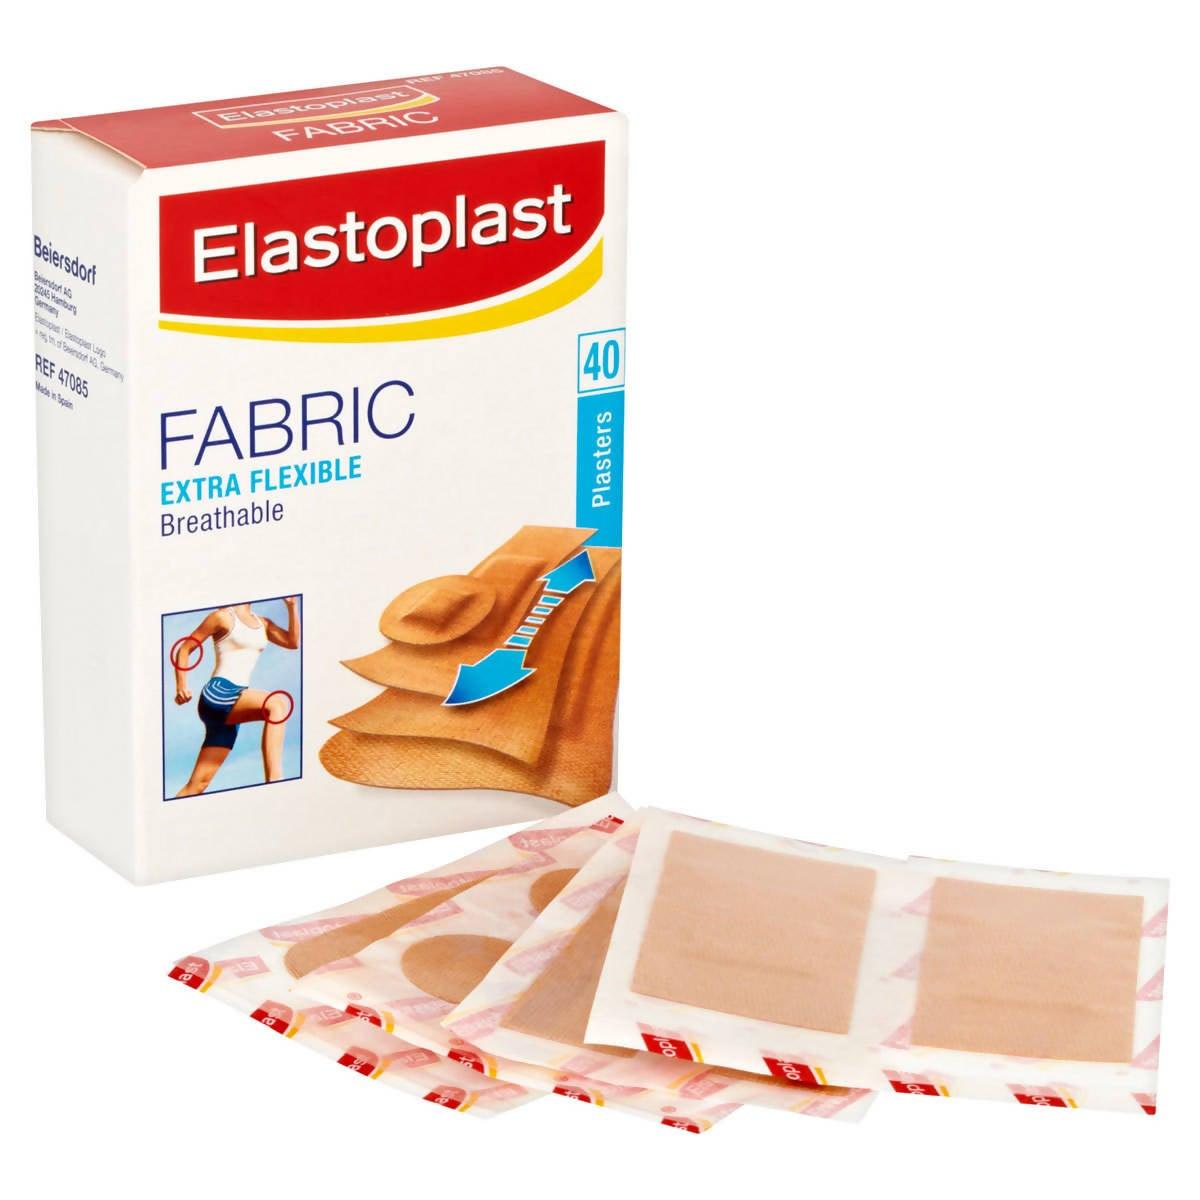 Elastoplast Fabric Extra Breathable Plasters, 5 x 40 Pack First Aid Costco UK   